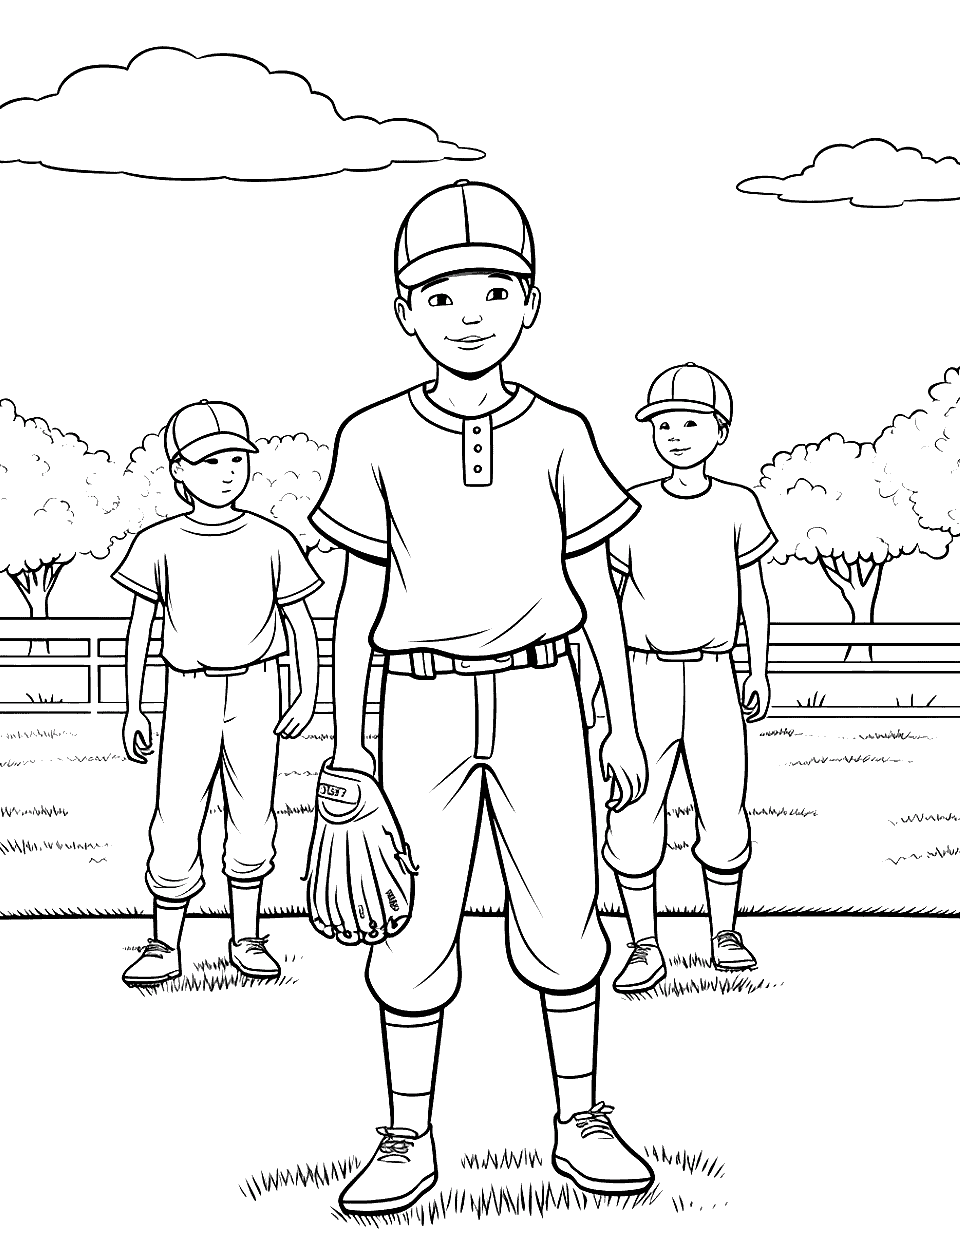 Baseball Camp Fun Coloring Page - Kids in baseball camp uniforms practicing, with a simple backdrop of a field and trees.